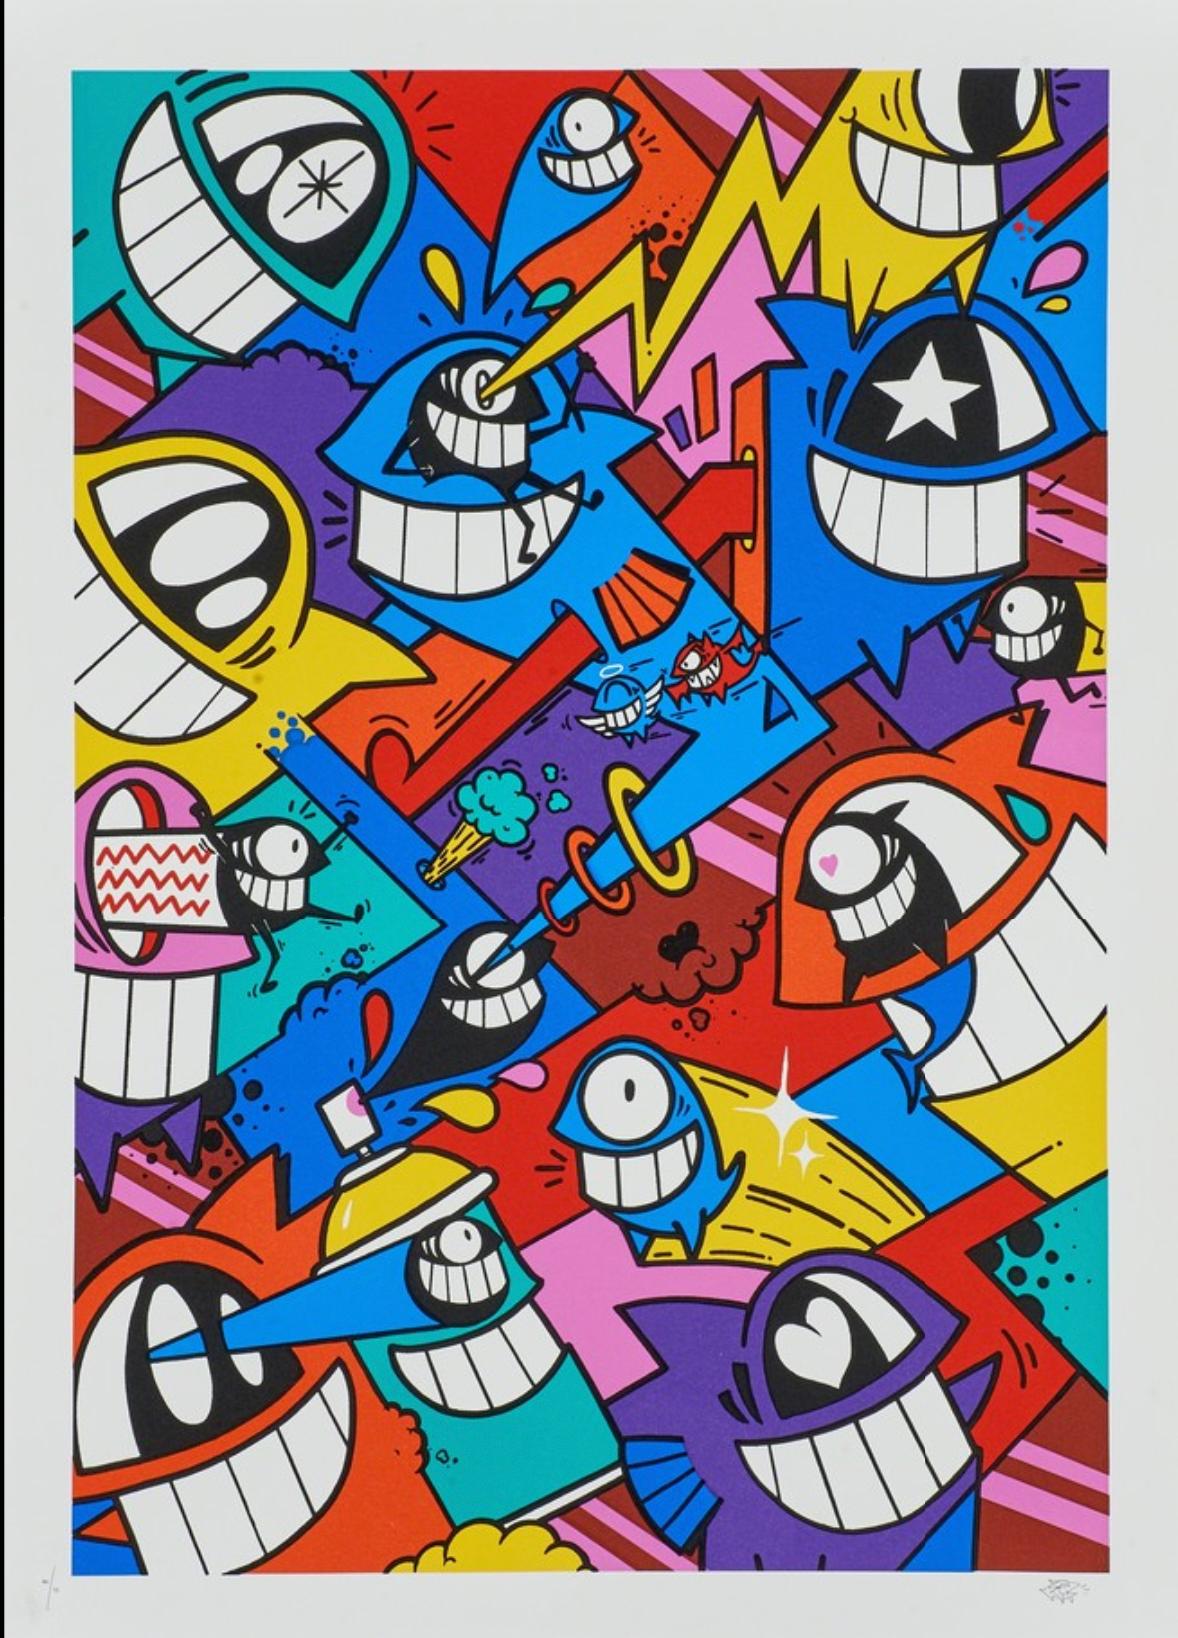 Happiness everywhere - Print by El Pez